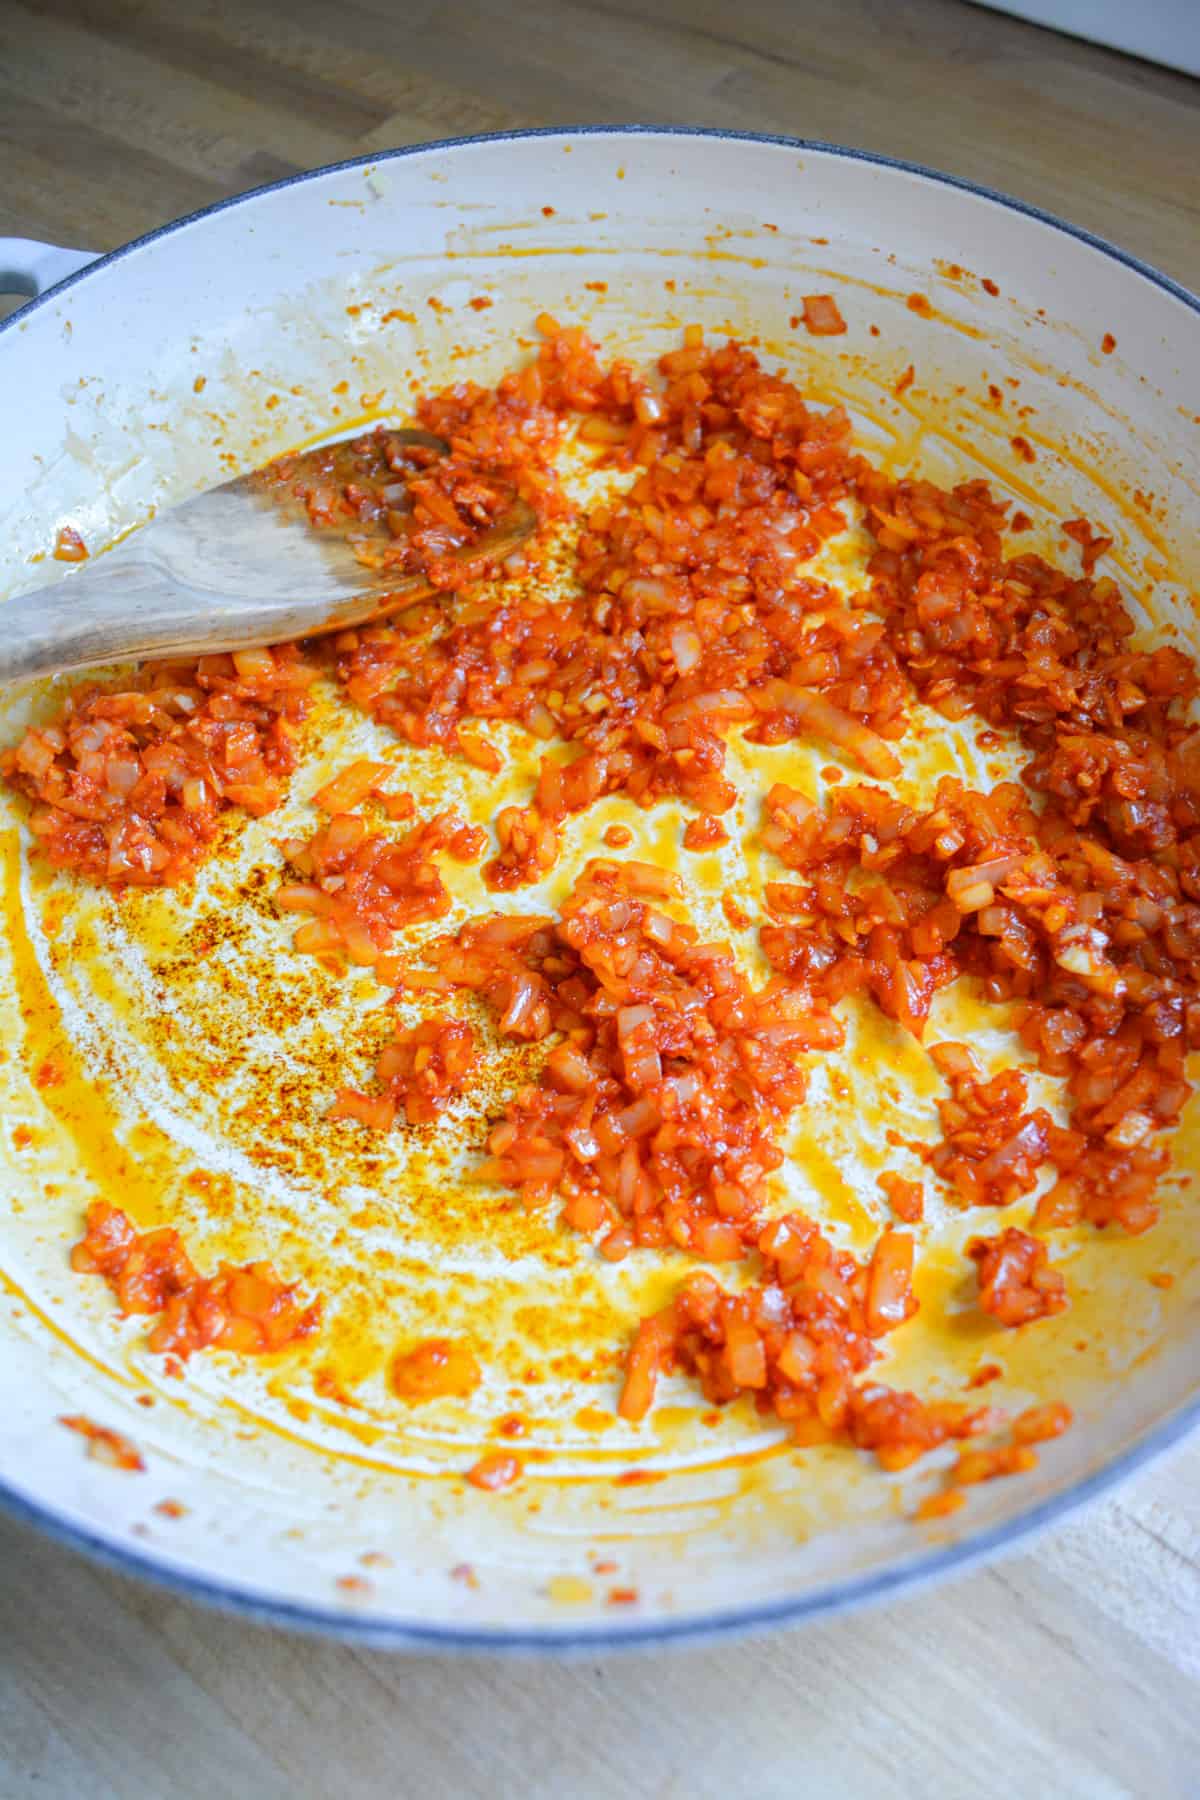 Tomato paste added into the onion and garlic in a wide shallow skillet.